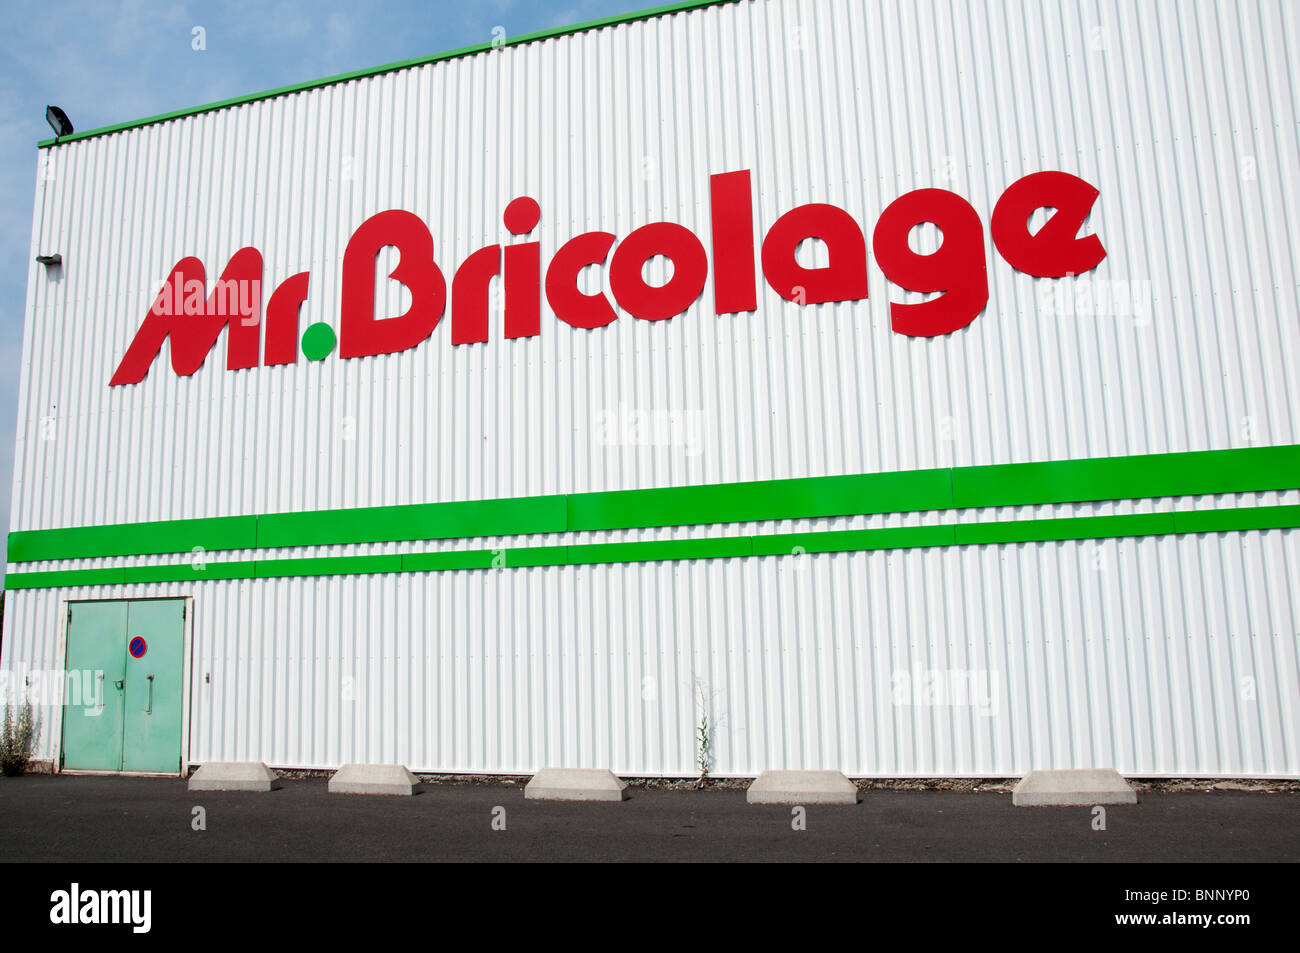 A Mr Bricolage Diy Warehouse Shop In France Stock Photo Alamy